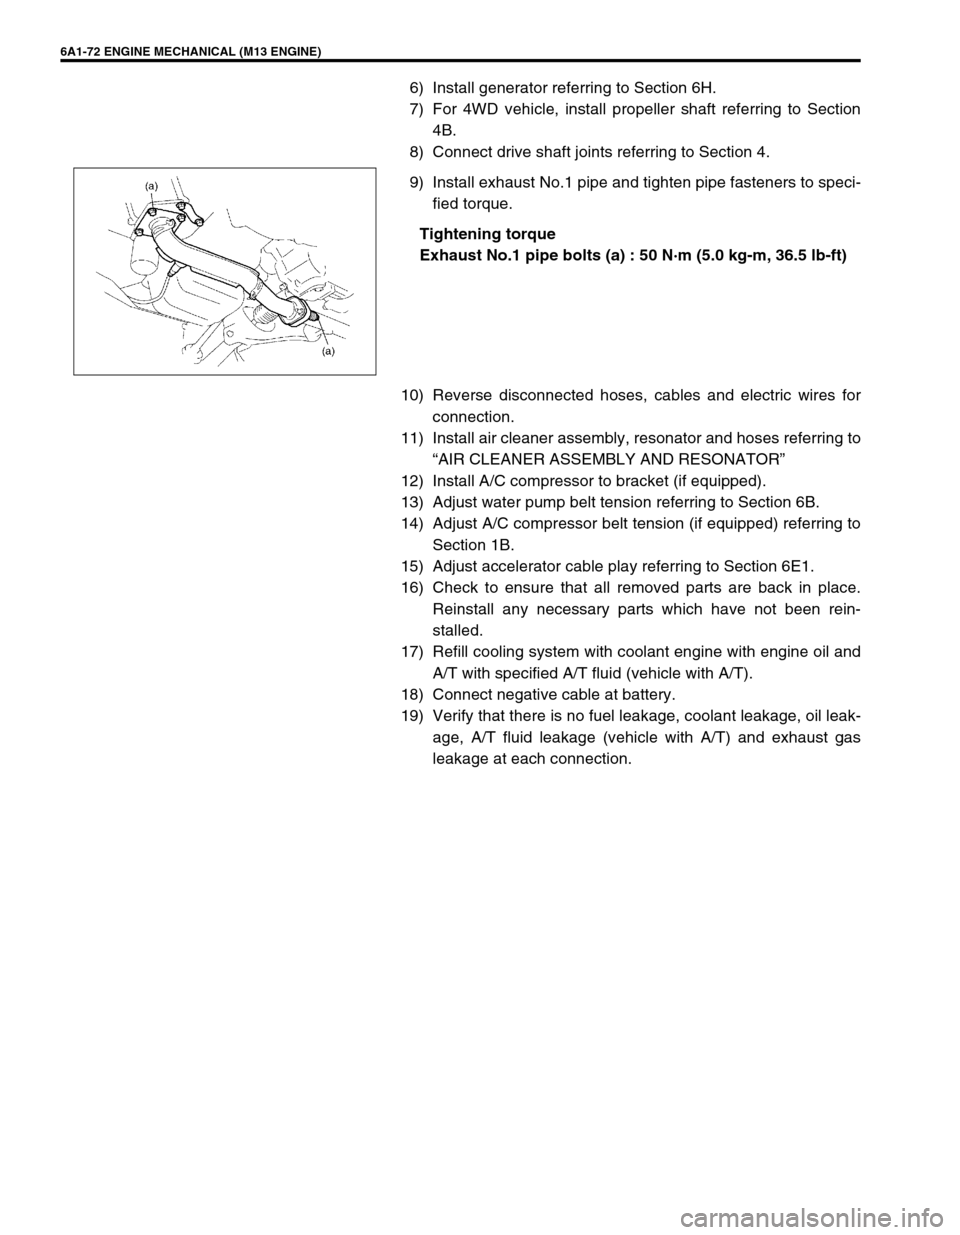 SUZUKI SWIFT 2000 1.G RG413 Service Service Manual 6A1-72 ENGINE MECHANICAL (M13 ENGINE)
6) Install generator referring to Section 6H.
7) For 4WD vehicle, install propeller shaft referring to Section
4B.
8) Connect drive shaft joints referring to Sect